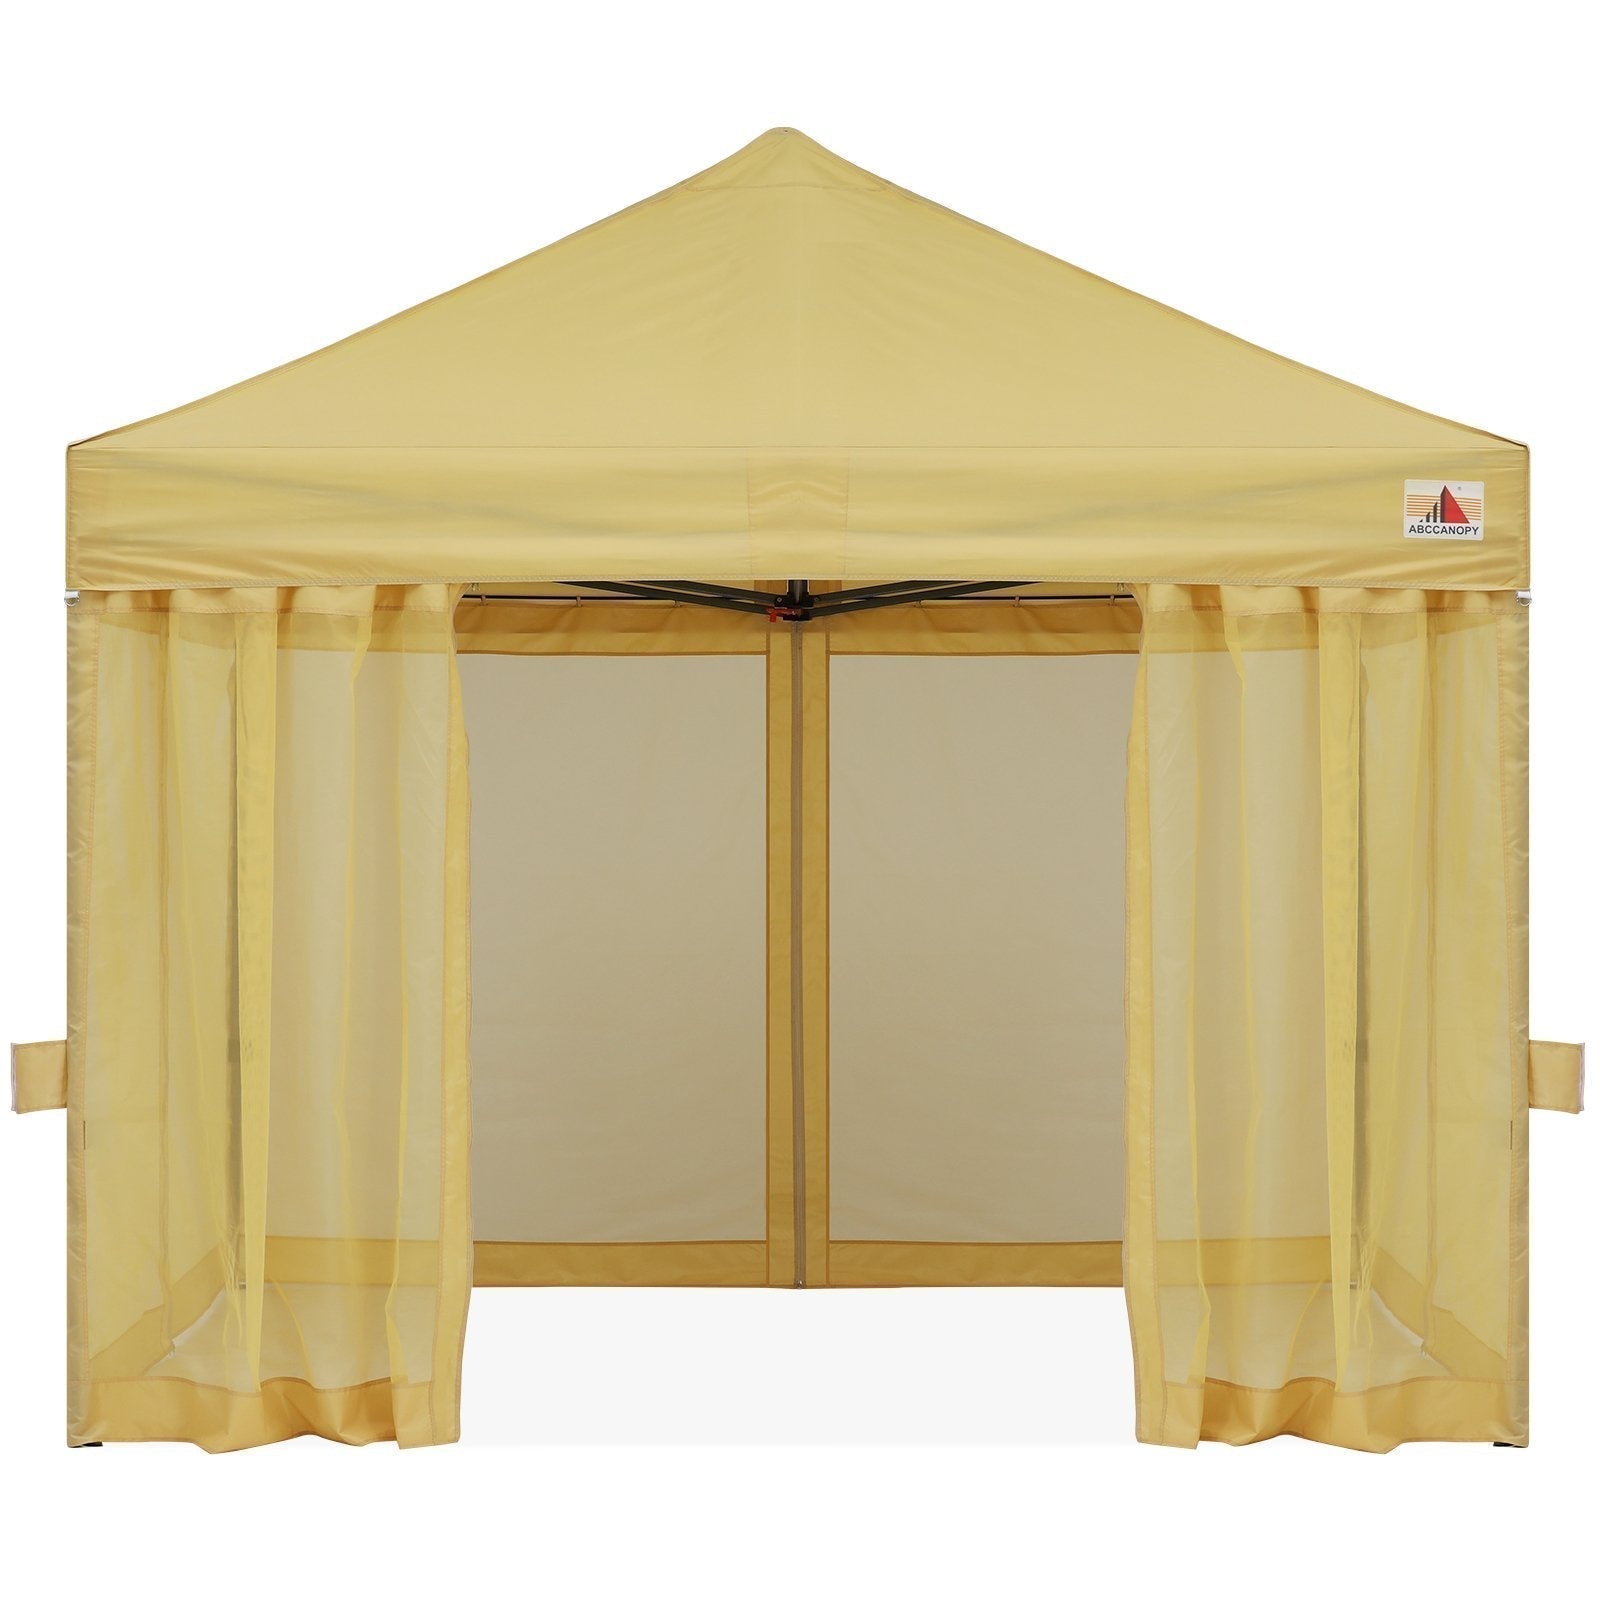 10x10 Pop Up Gazebo Canopy Tent Instant Outdoor Screen House with Netting Walls - ABC-CANOPY